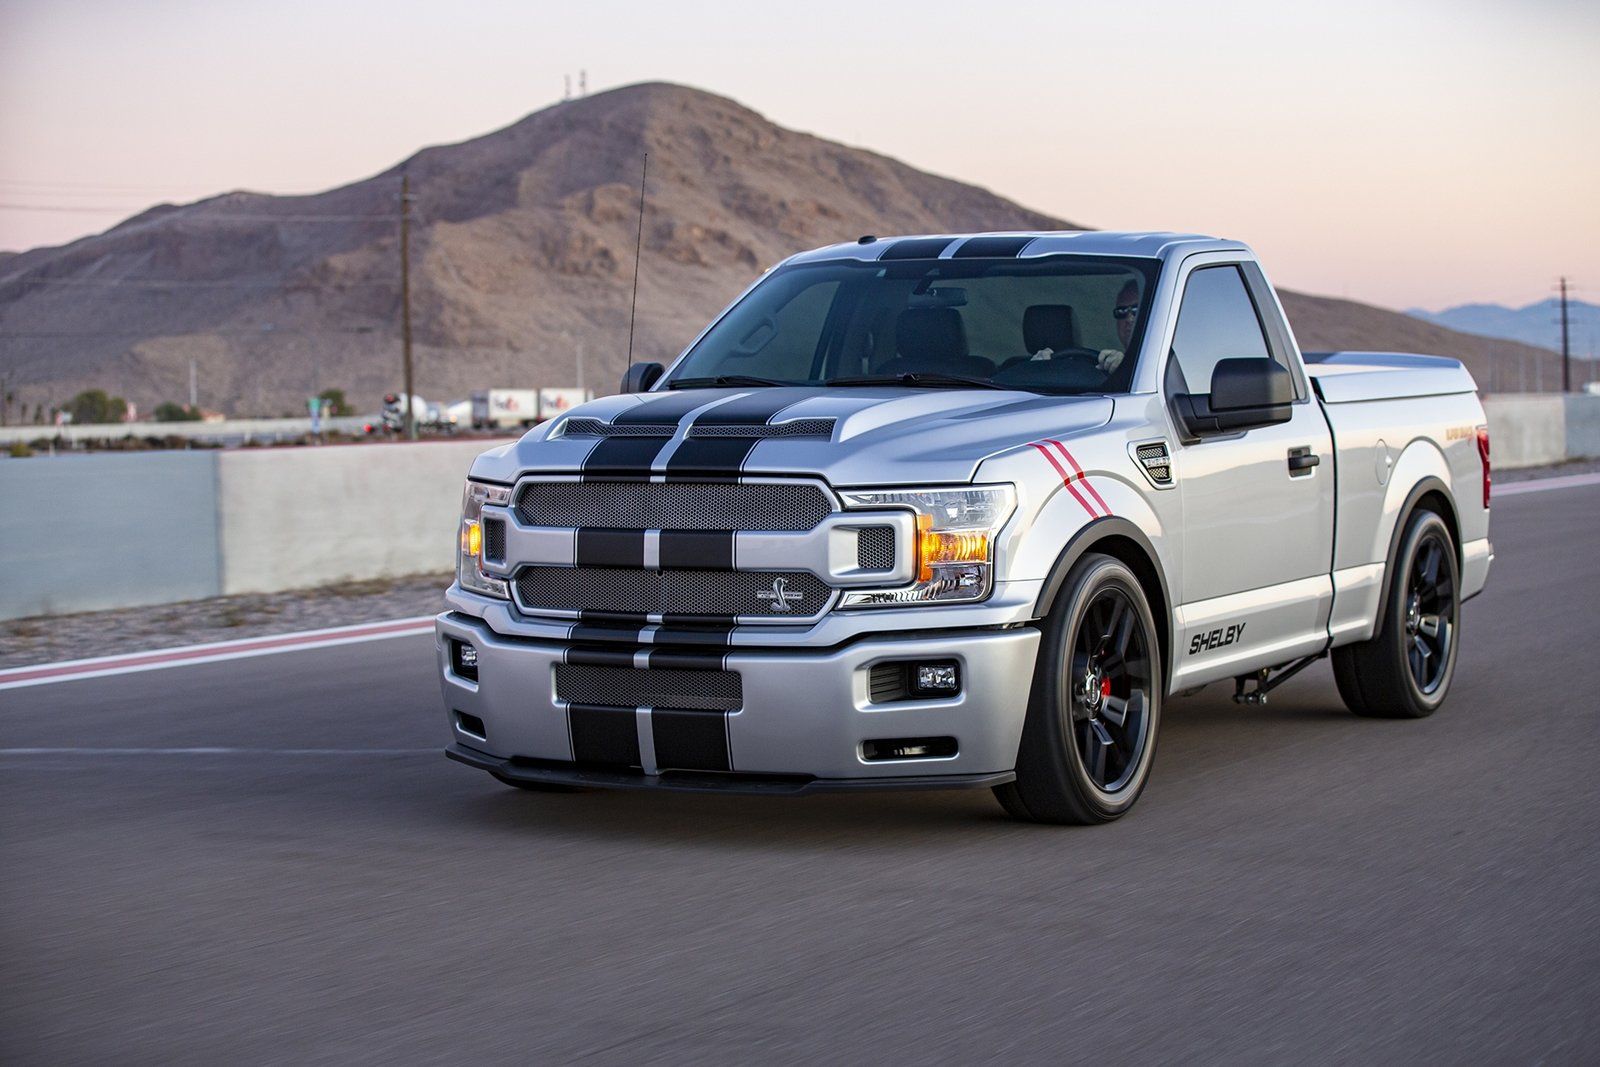 2020 Shelby Ford F-150 Super Snake